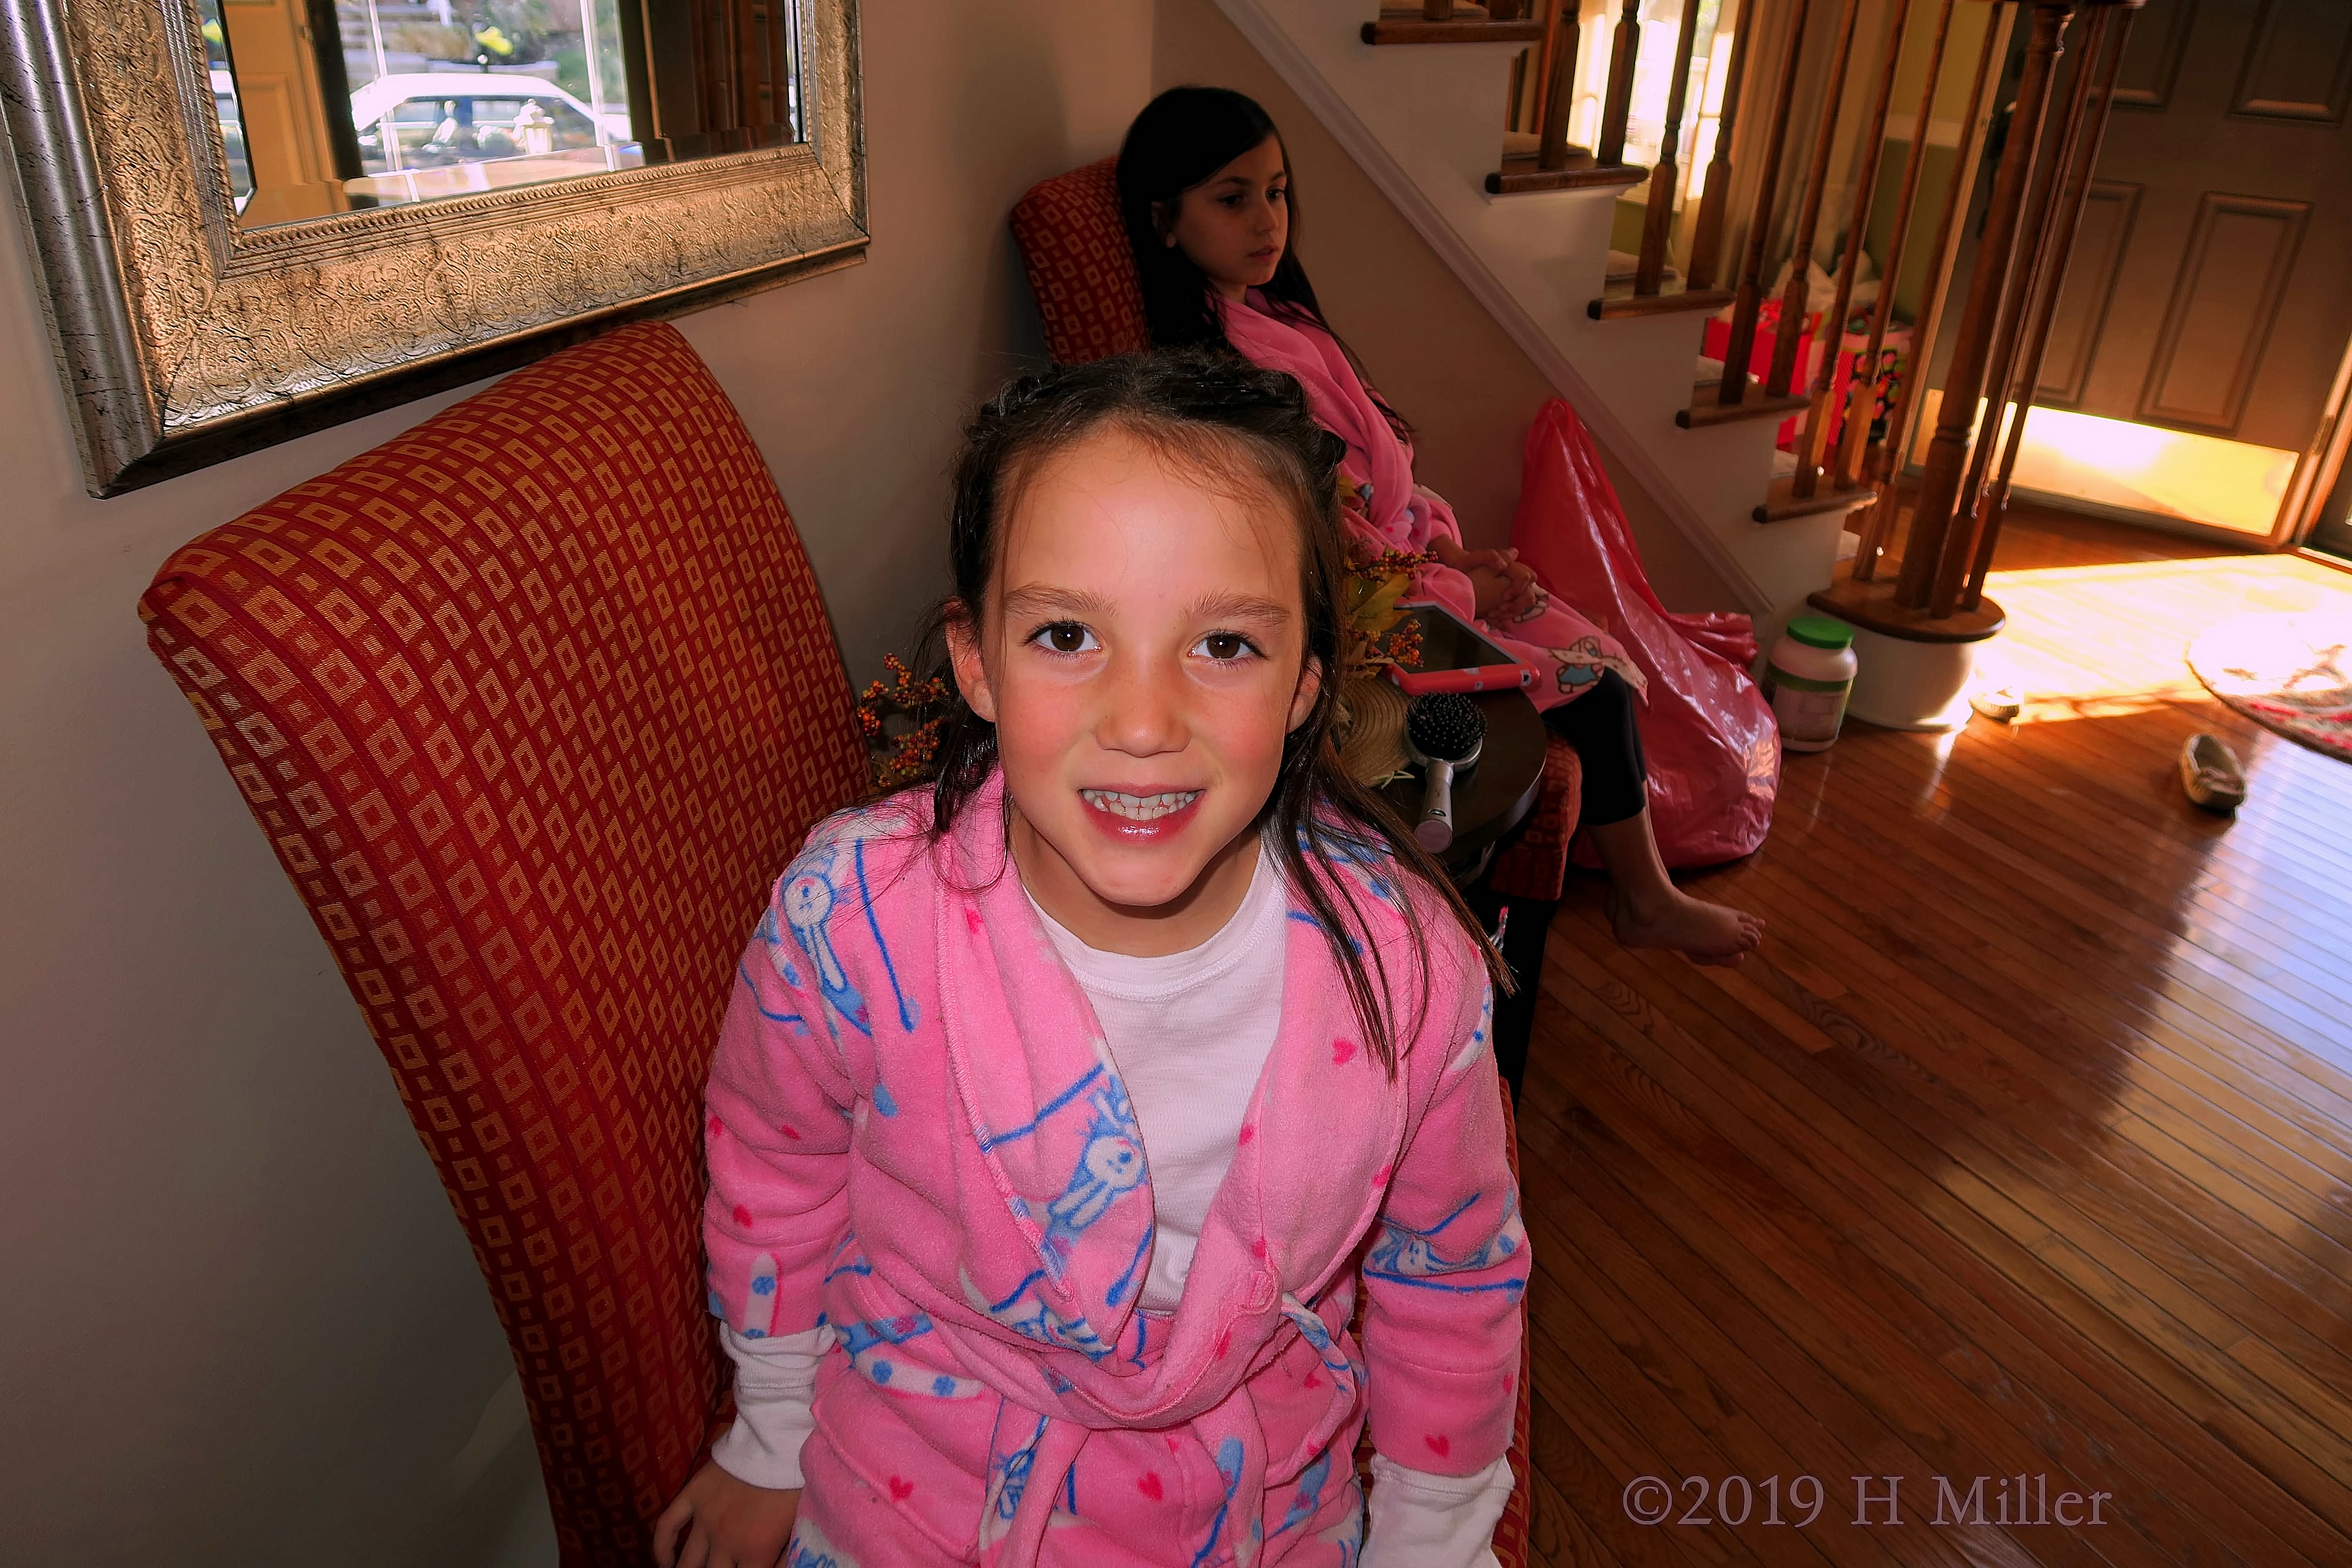 Grinning In A Pink Bunny Robe! Kids Party Guest Poses In Kids Spa Robe! 4